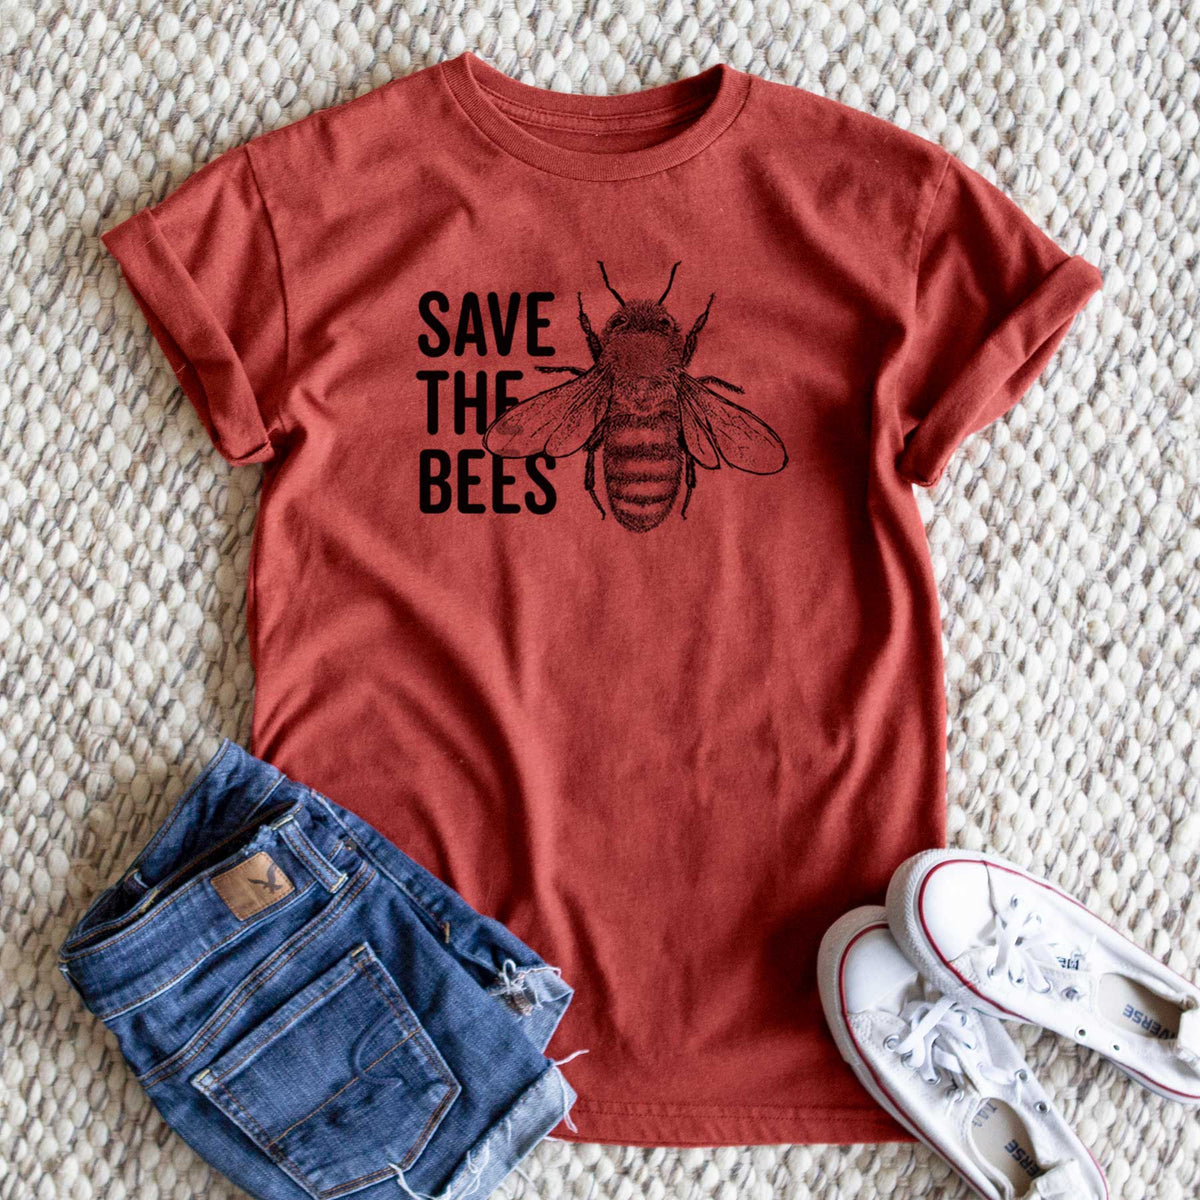 Save the Bees - Unisex Recycled Eco Tee  - CLOSEOUT - FINAL SALE